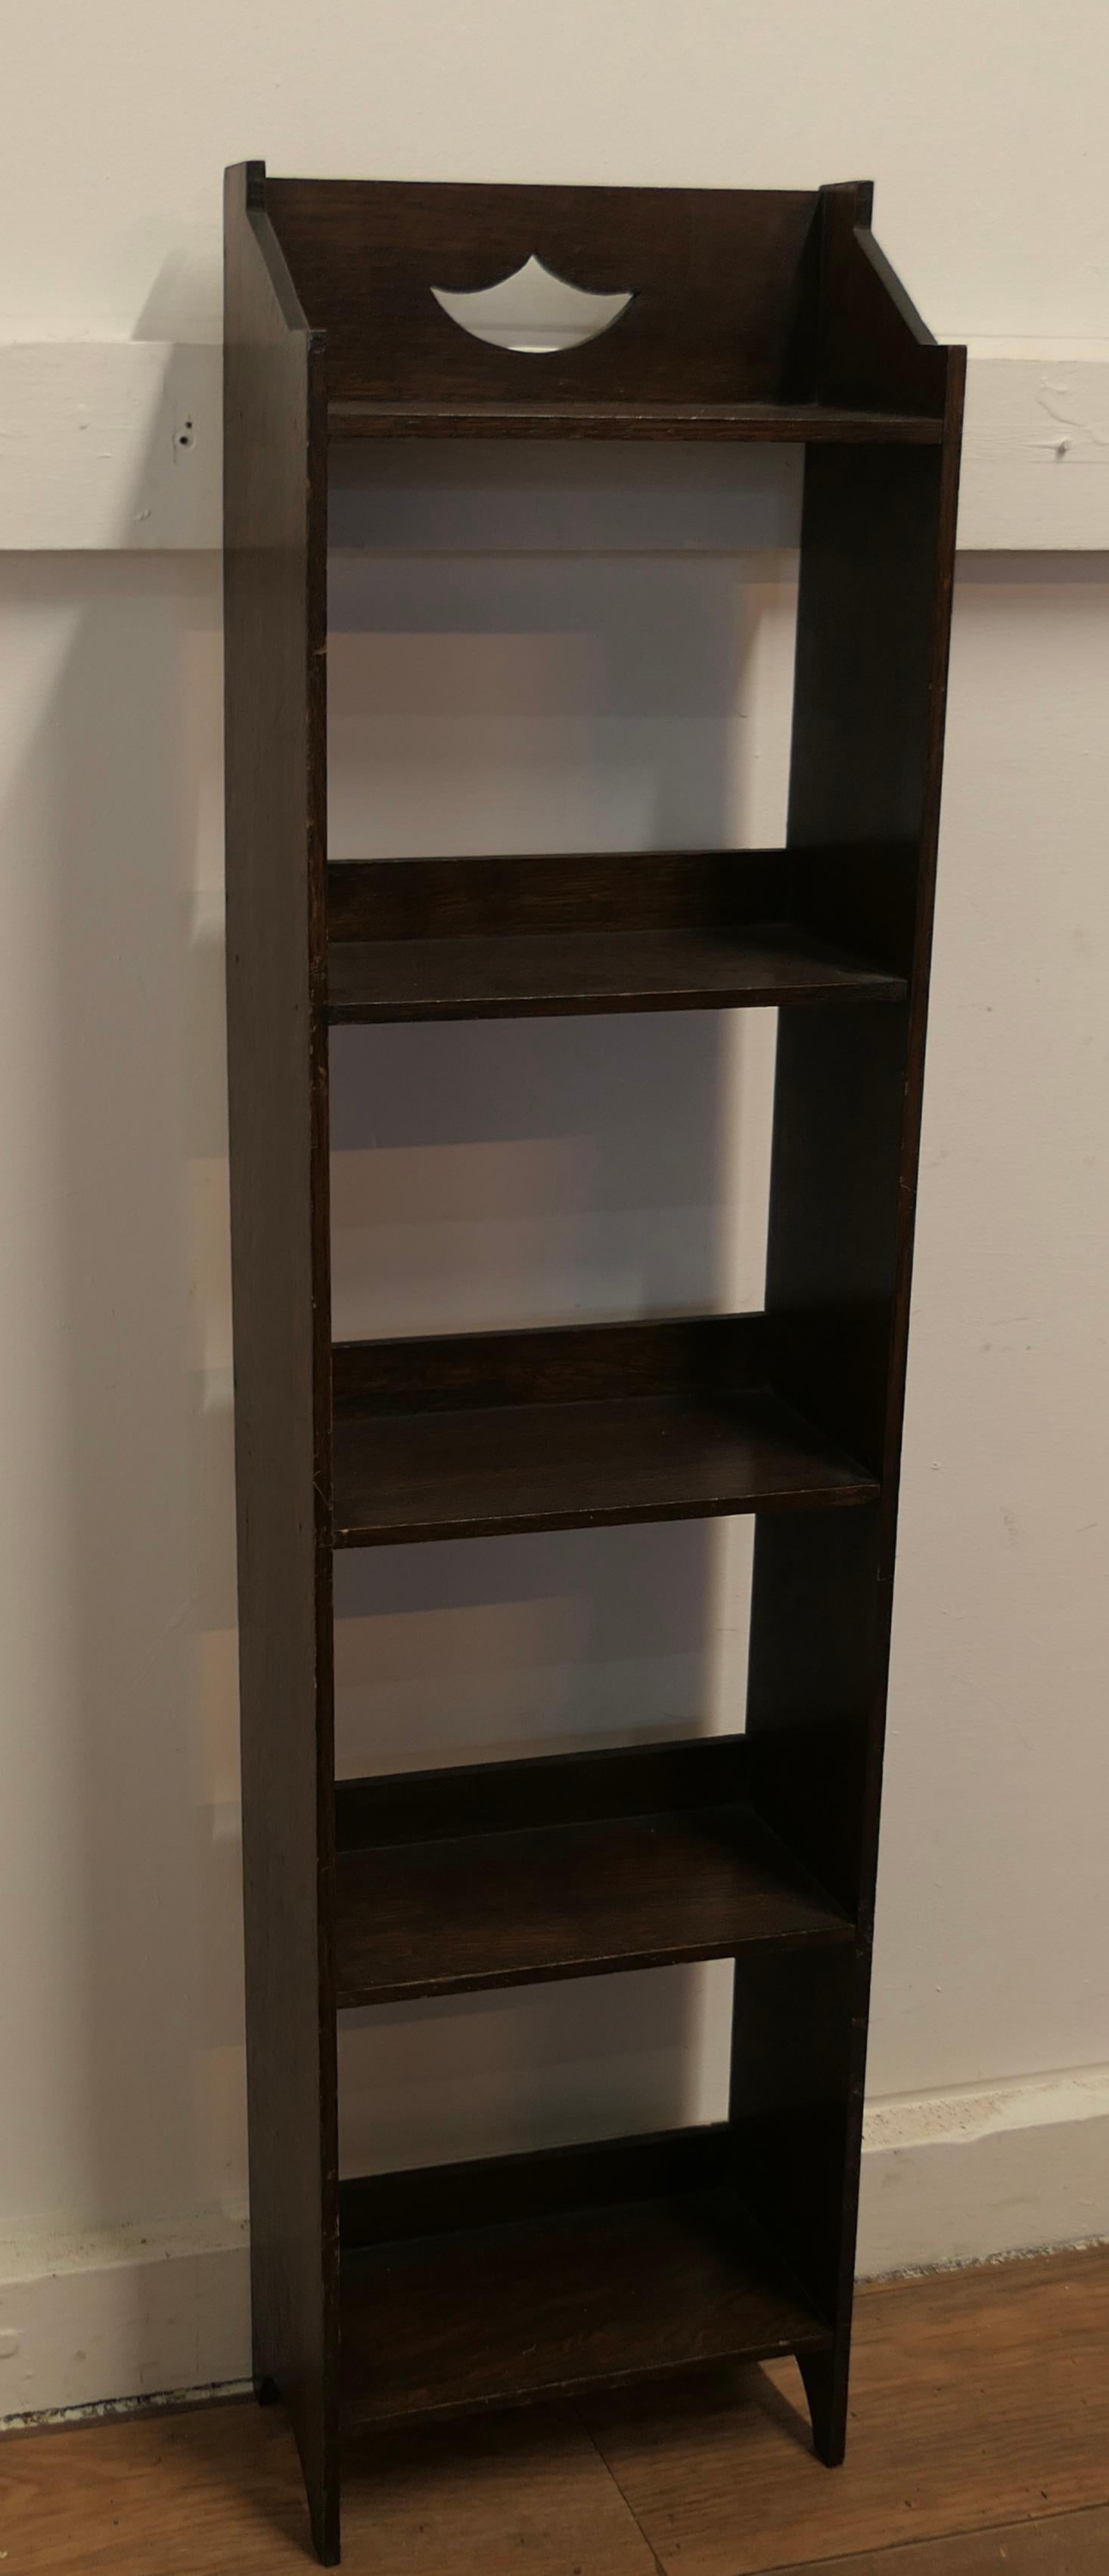 Early 20th Century Arts and Crafts Tall Slim Open Front Oak Bookcase.   